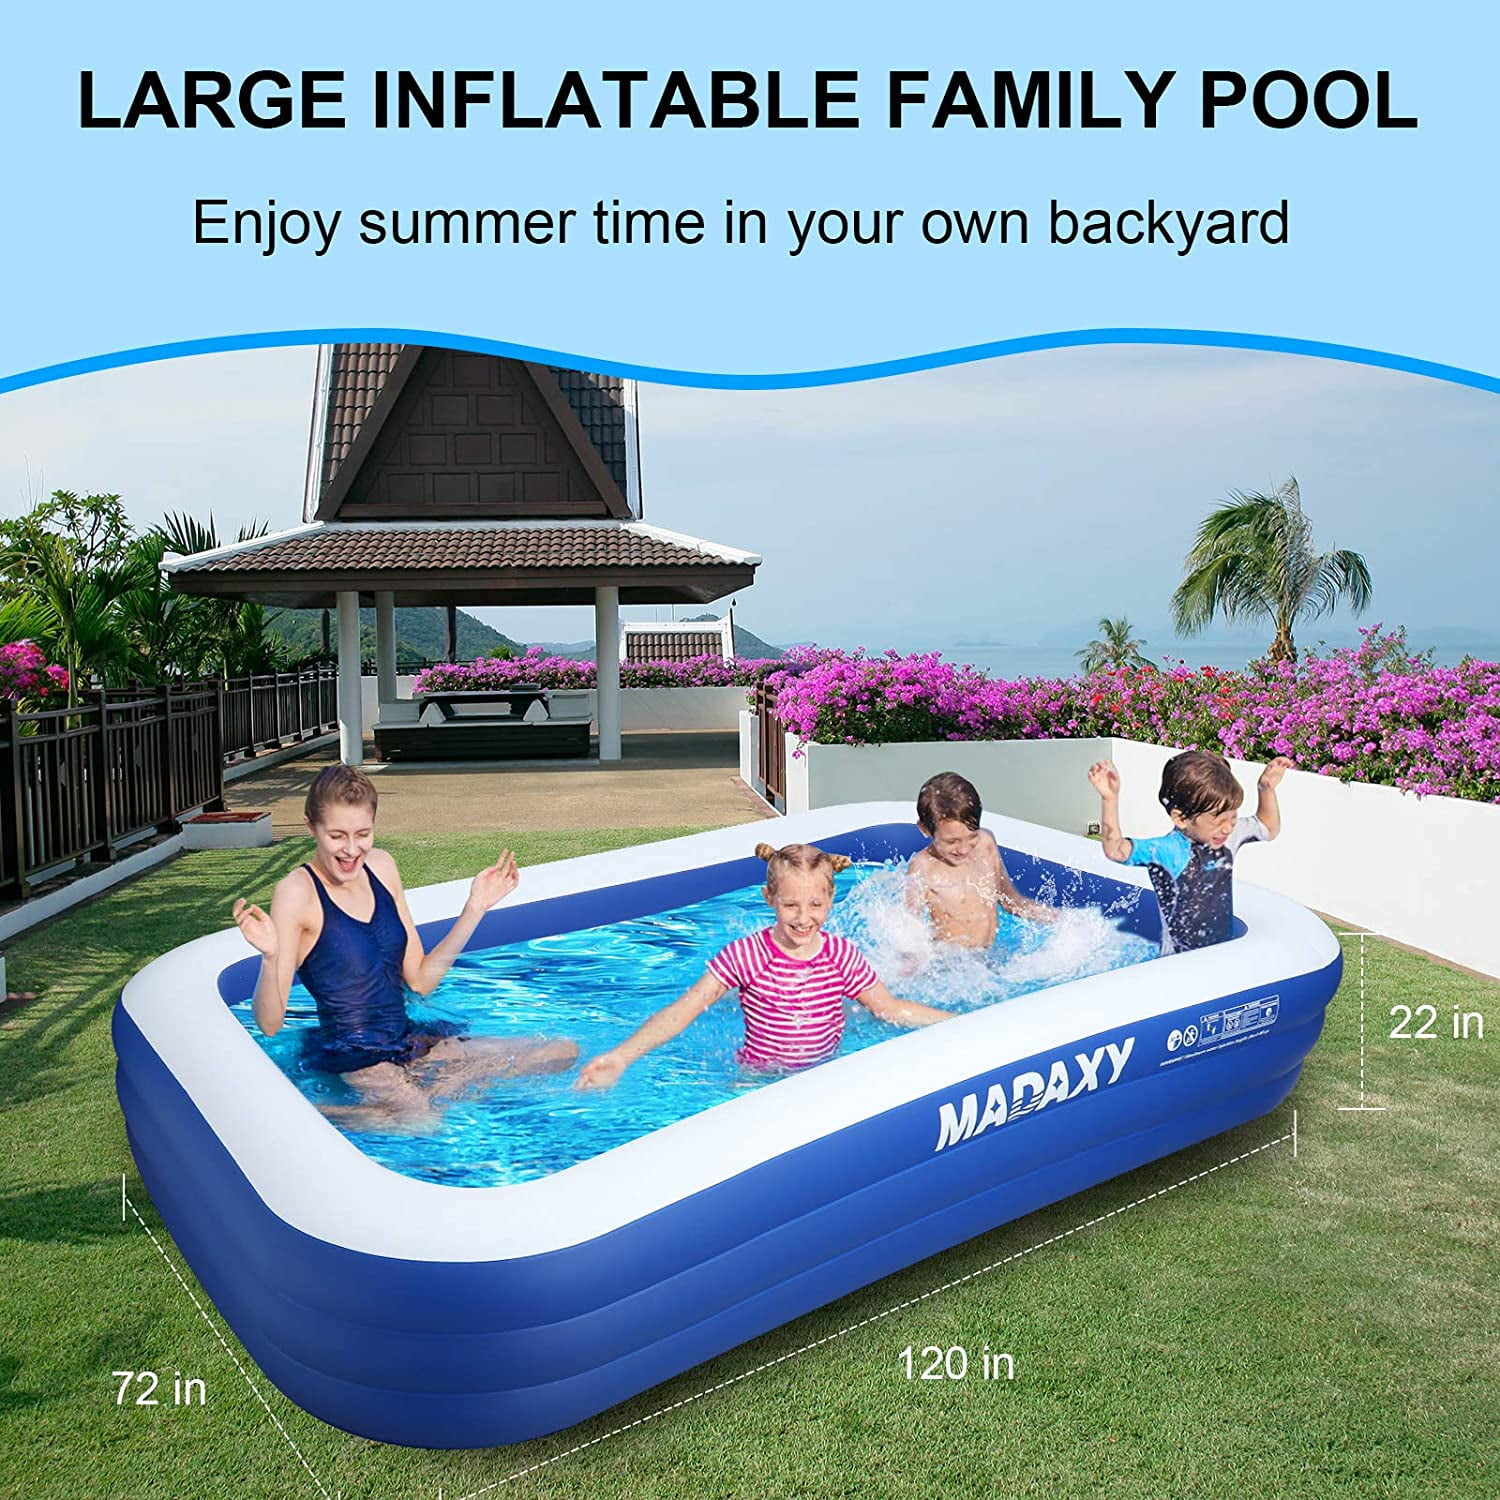 Large Blow Up Pool for Backyards Portable 10x6 Adult Kiddie Outdoor Pool Blue 120 X 72 X 22 Above Ground Pool for Families Electric Air Pump CO-Z Inflatable Swimming Pool for Kids and Adults 